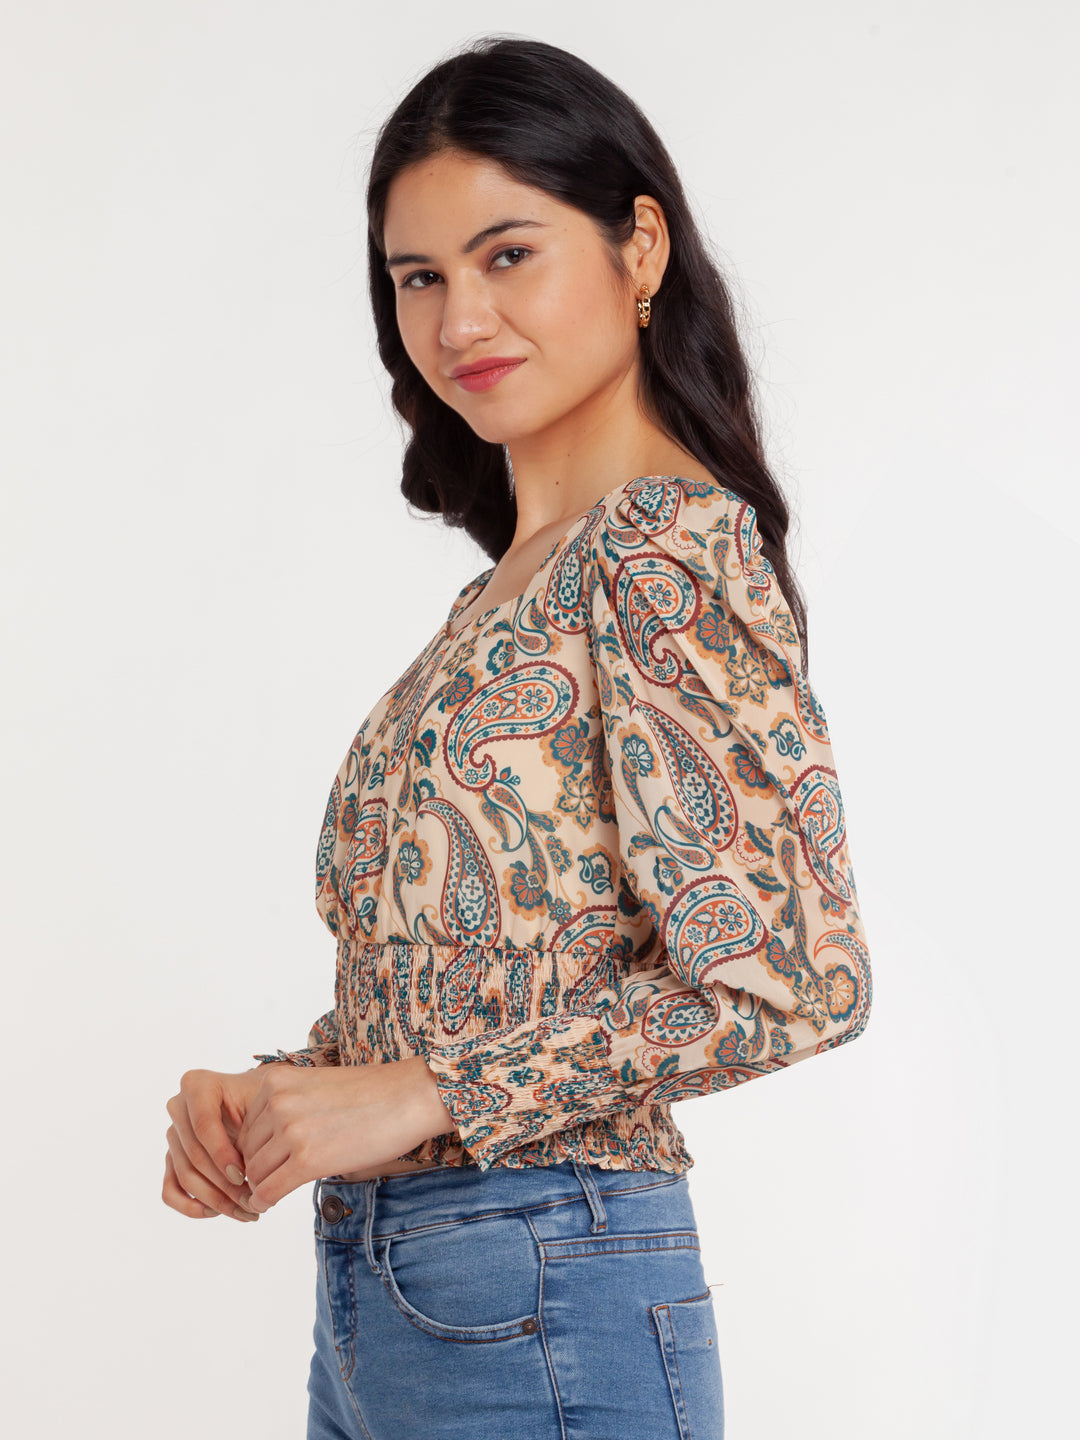 Beige Printed Smocking Top For Women